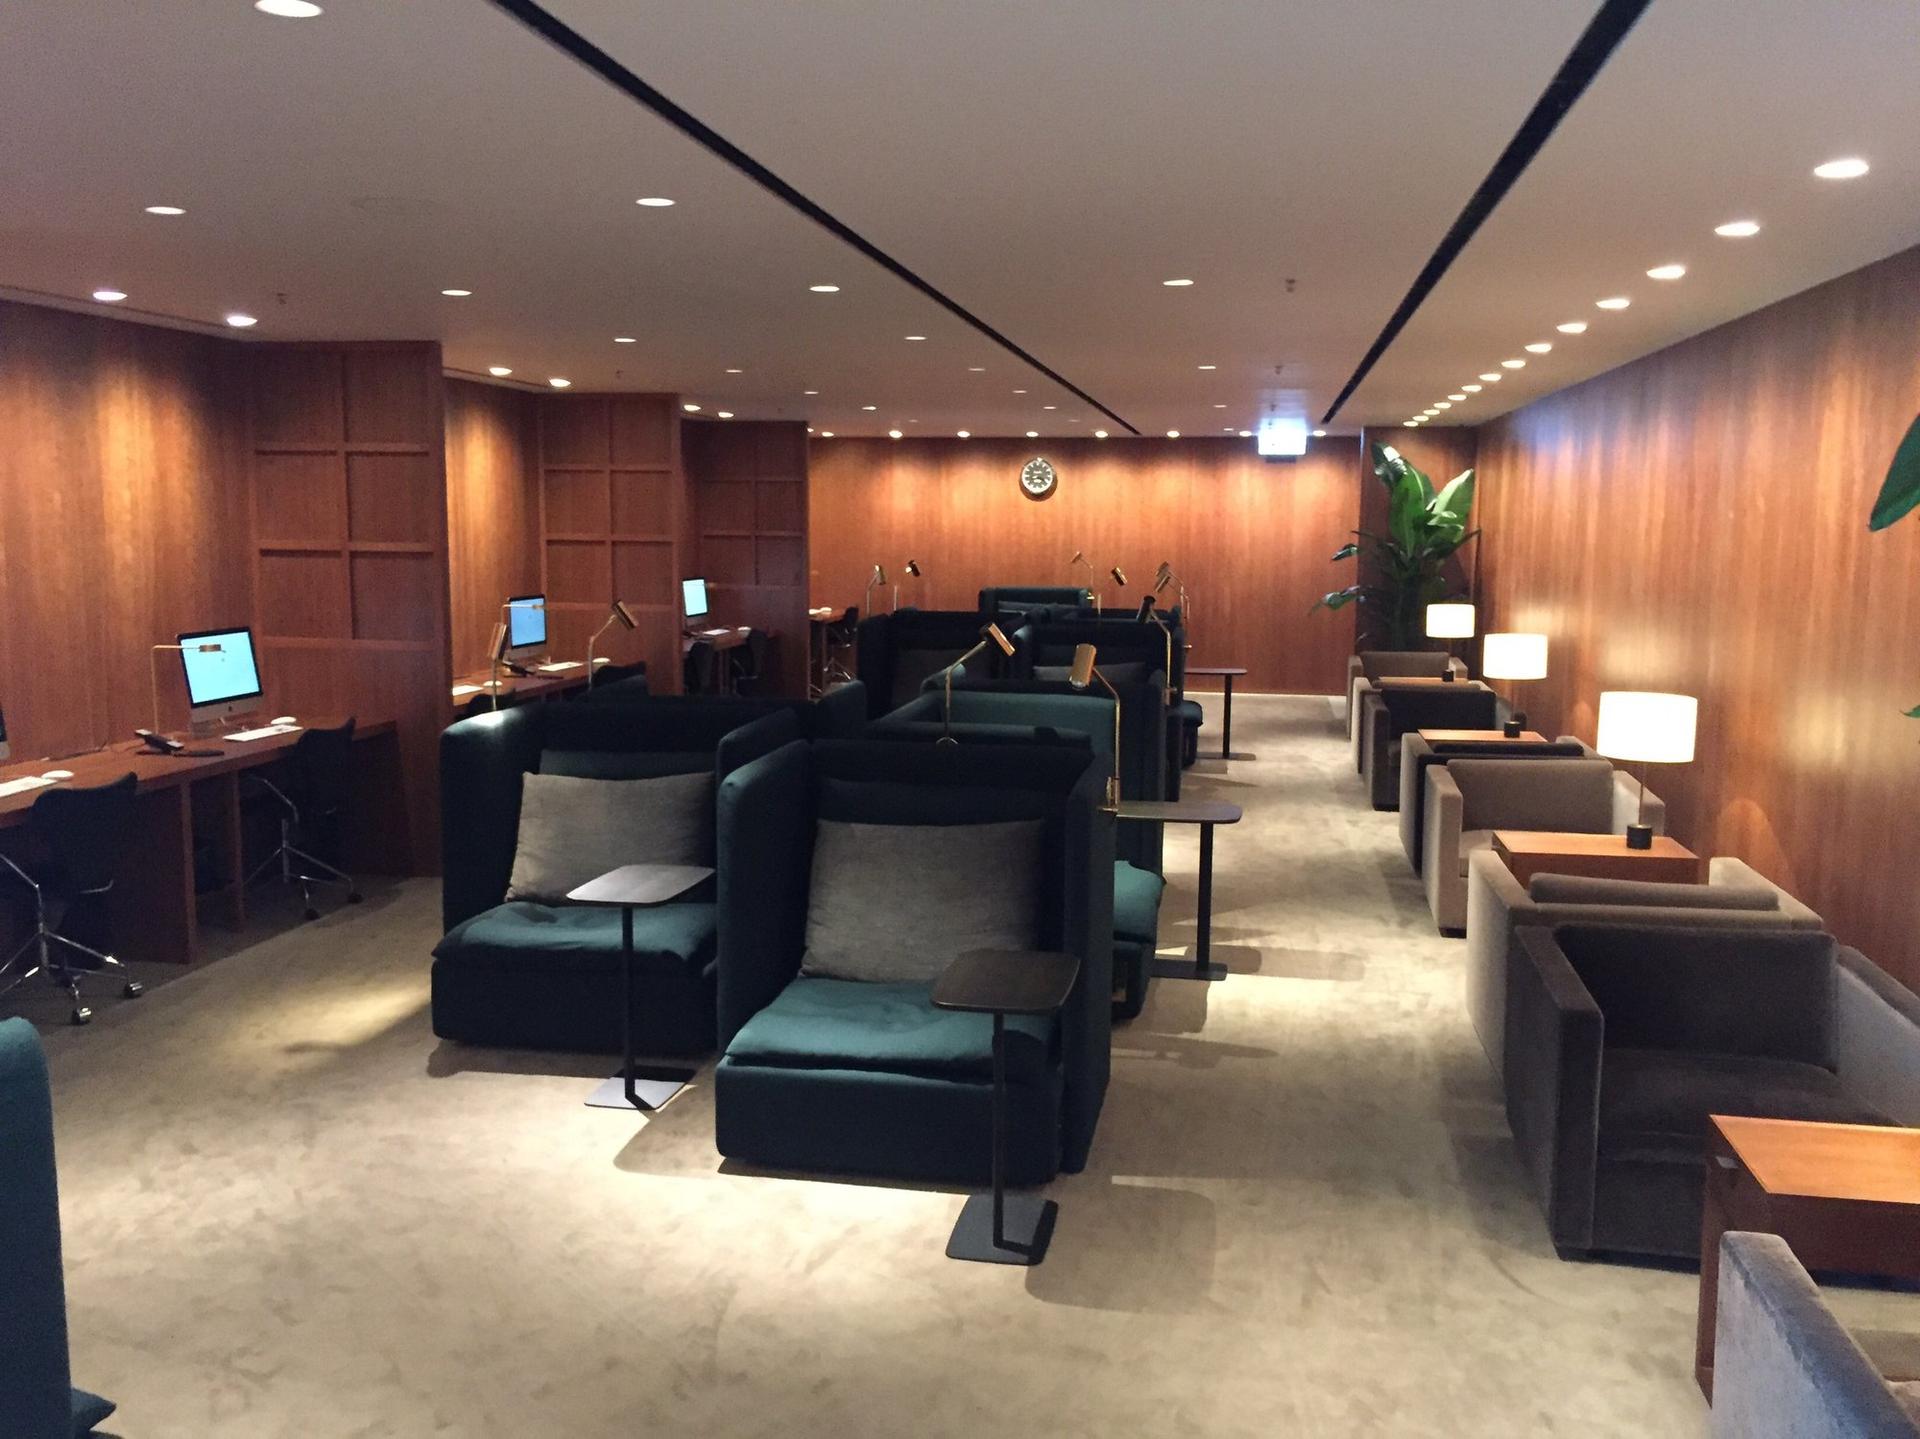 Cathay Pacific The Pier Business Class Lounge image 15 of 61